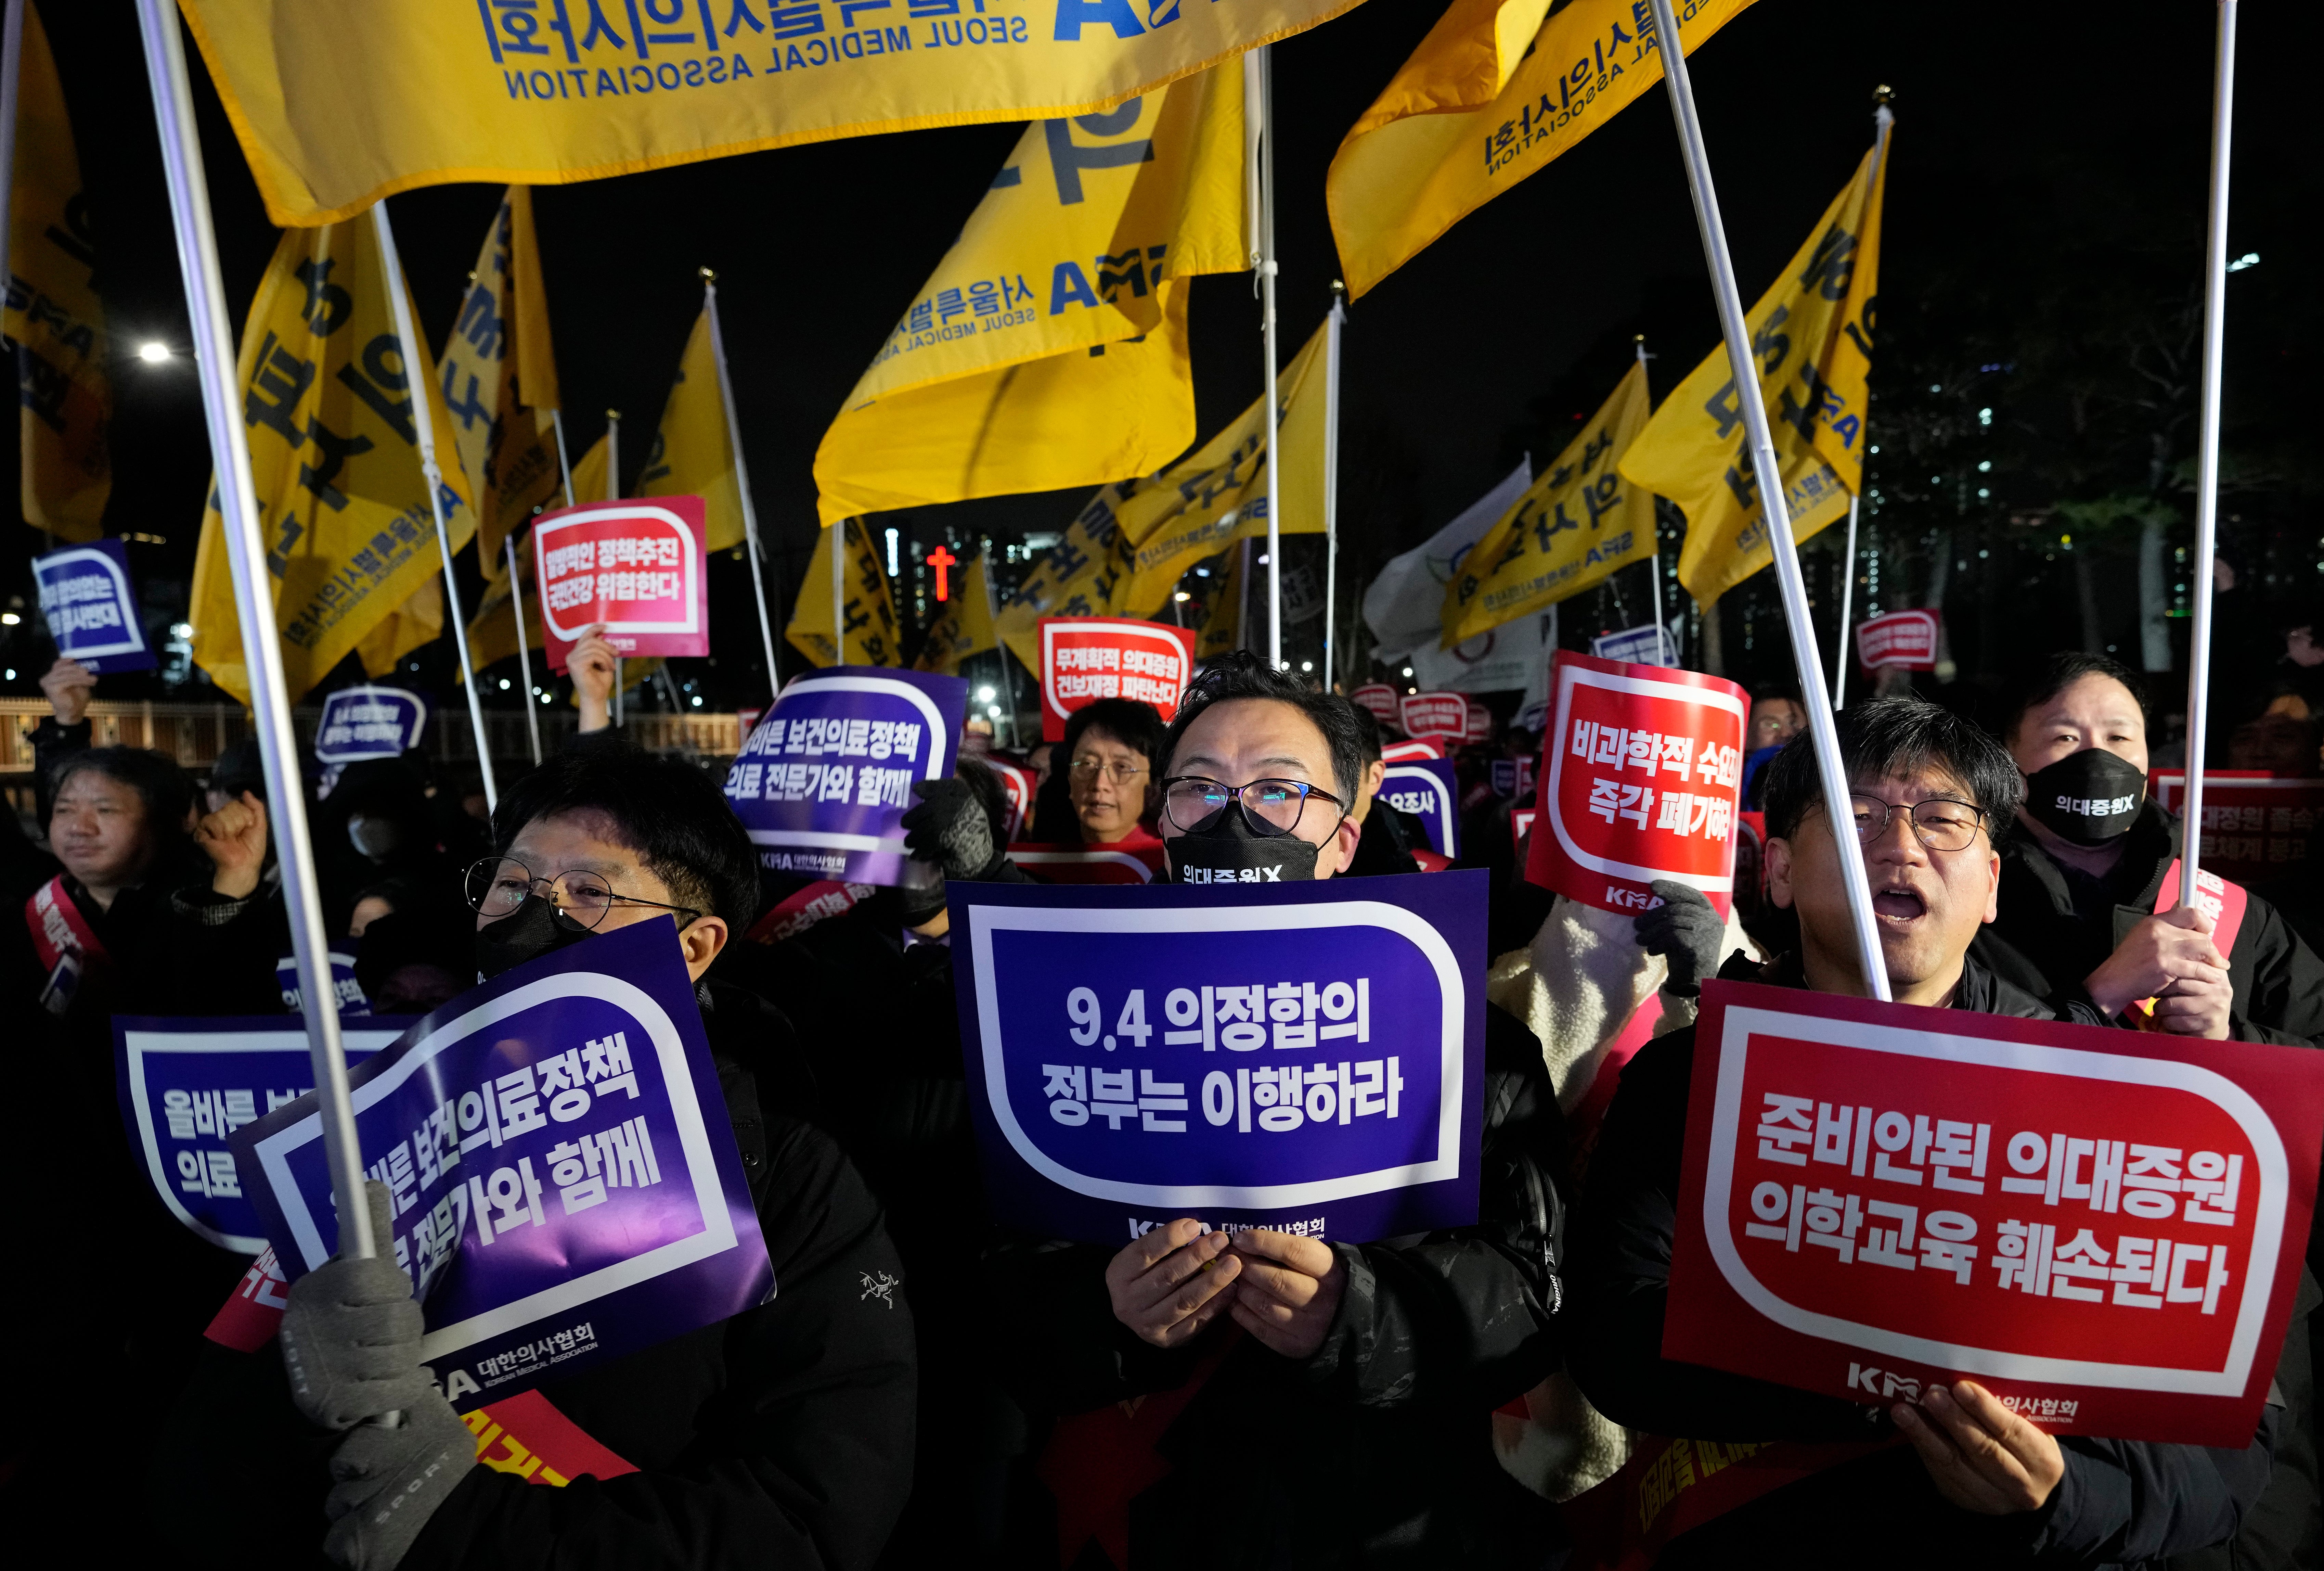 Doctors stage a rally against the government’s medical policy near the presidential office in Seoul, South Korea